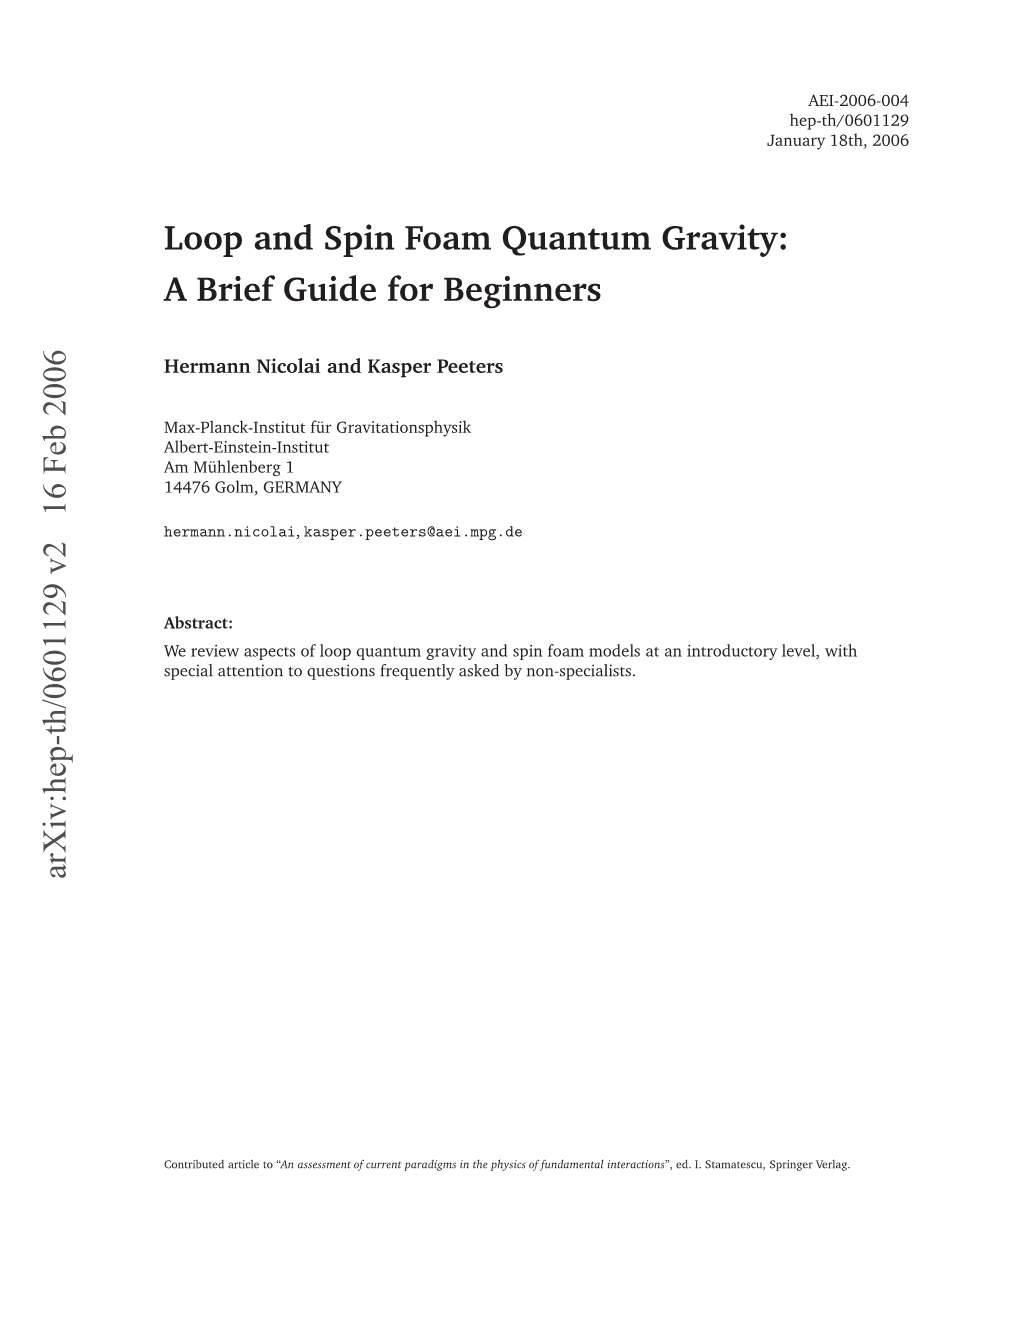 Loop and Spin Foam Quantum Gravity: a Brief Guide for Beginners